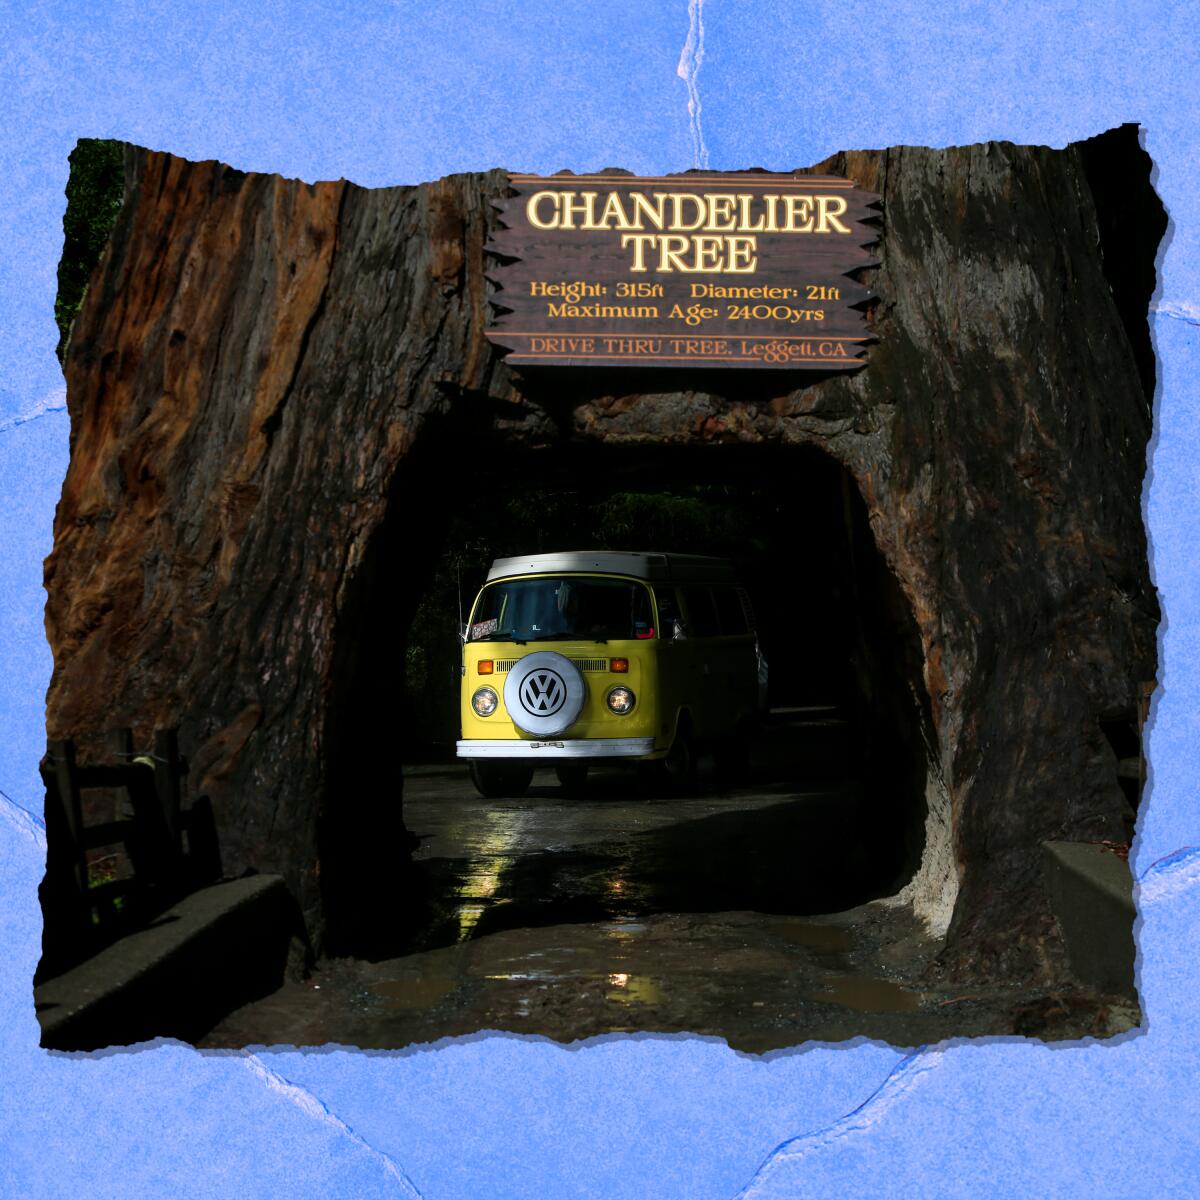 A Volkswagen mini-bus is seen in a tunnel in a tree with the sign "Chandelier Tree."